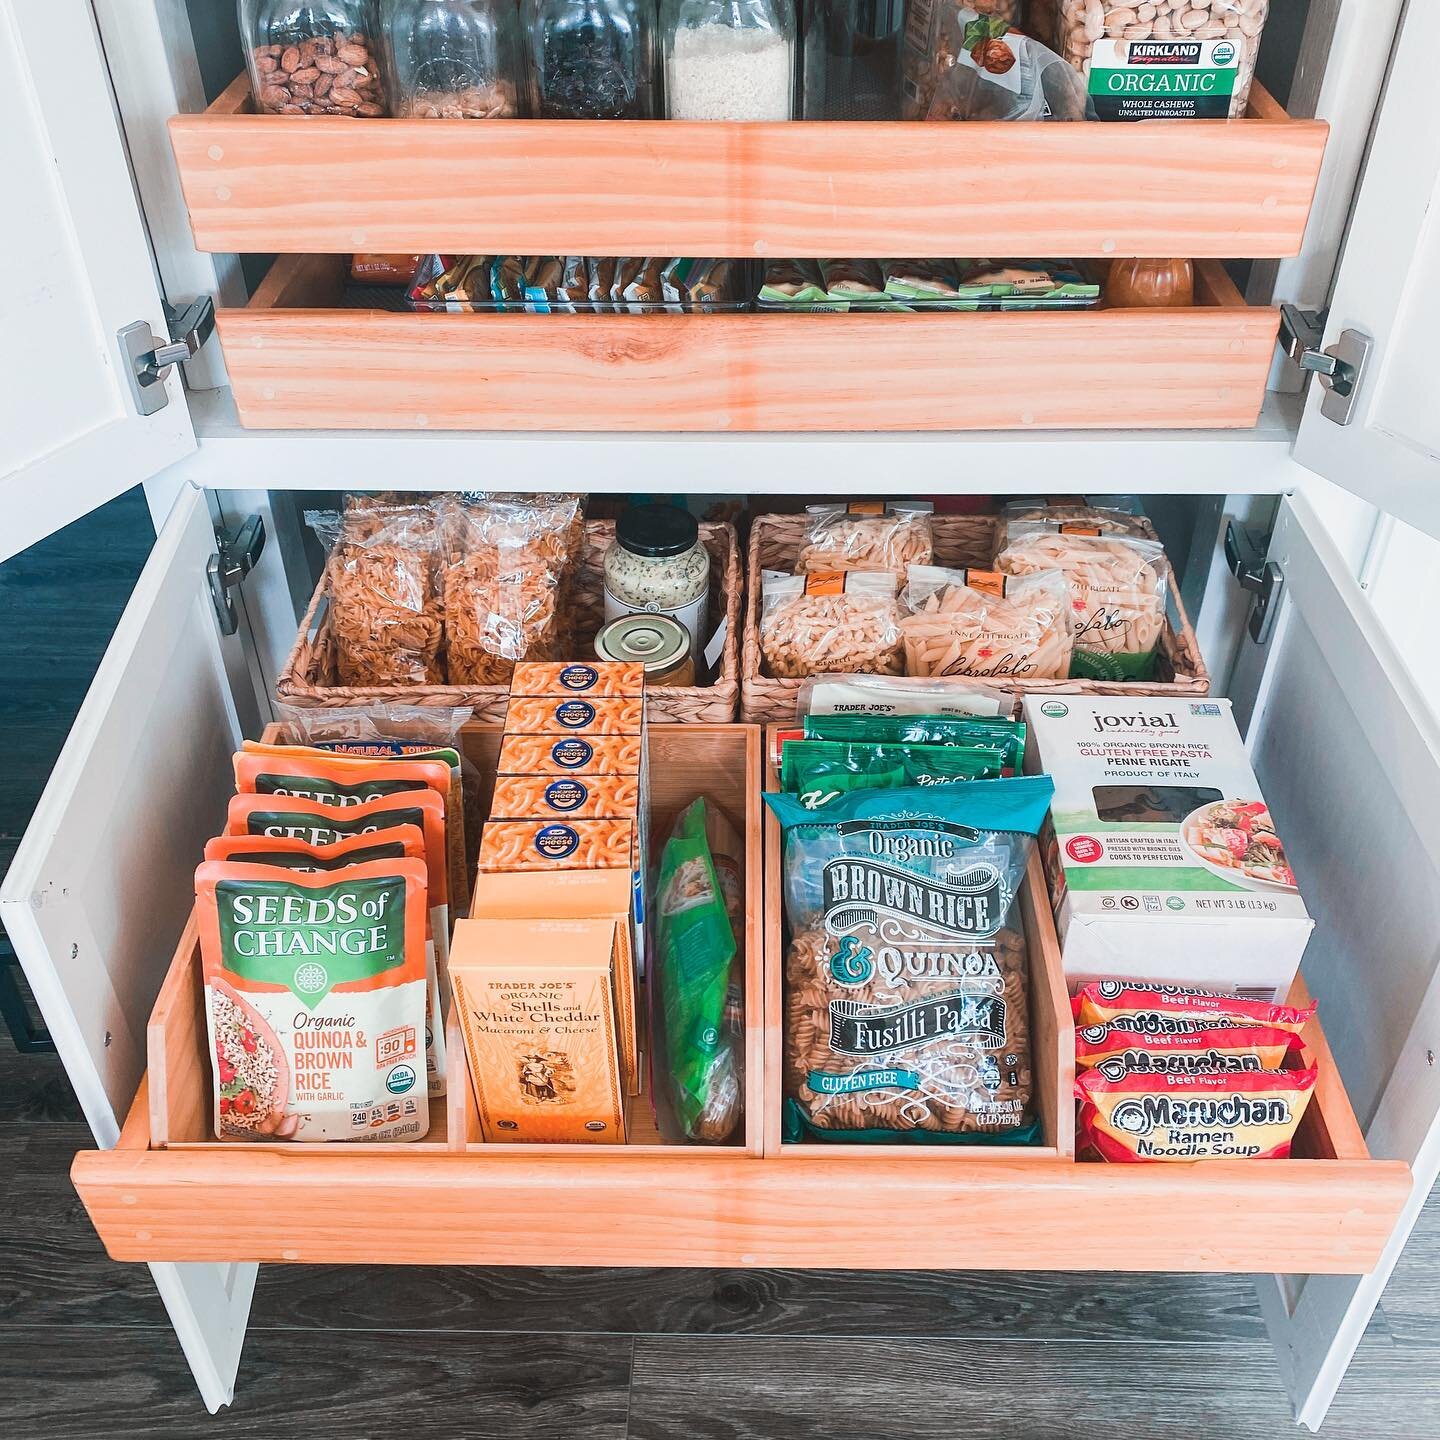 We often get asked about the best way to organize pull out drawers in the kitchen.

Creating themed zones with beautiful storage dividers is the key!

You may be wondering how to take your current system to the next level, where it truly sparks joy +